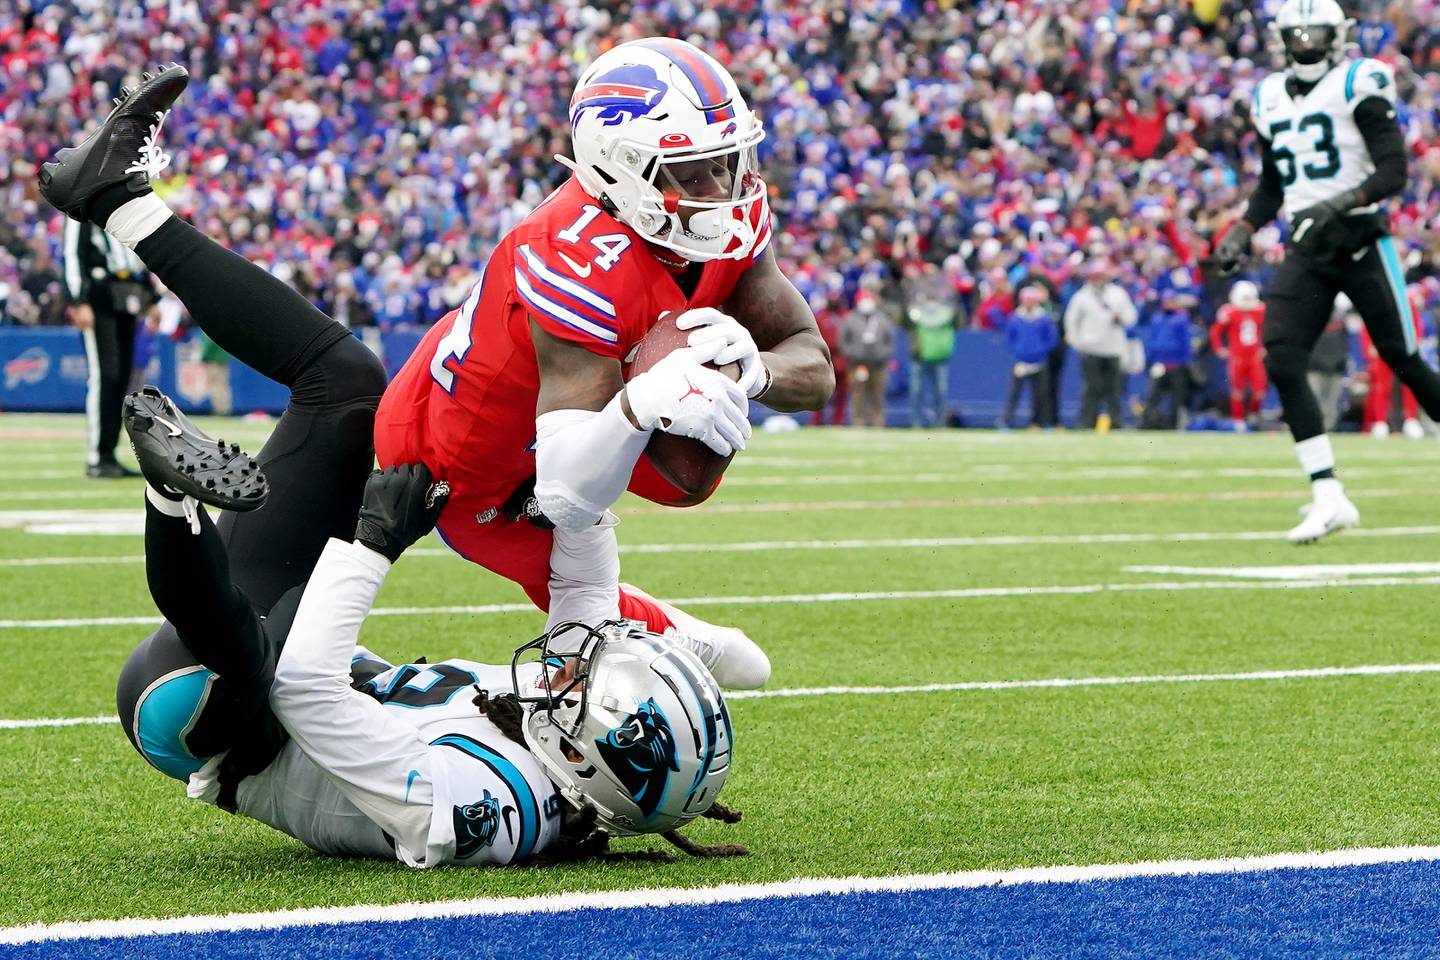 Stefon Diggs #14 of the Buffalo Bills catches an eleven-yard pass over Stephon Gilmore #9 of the Carolina Panthers and runs in for a touchdown in the second quarter of the game at Highmark Stadium on December 19, 2021 in Orchard Park, New York.